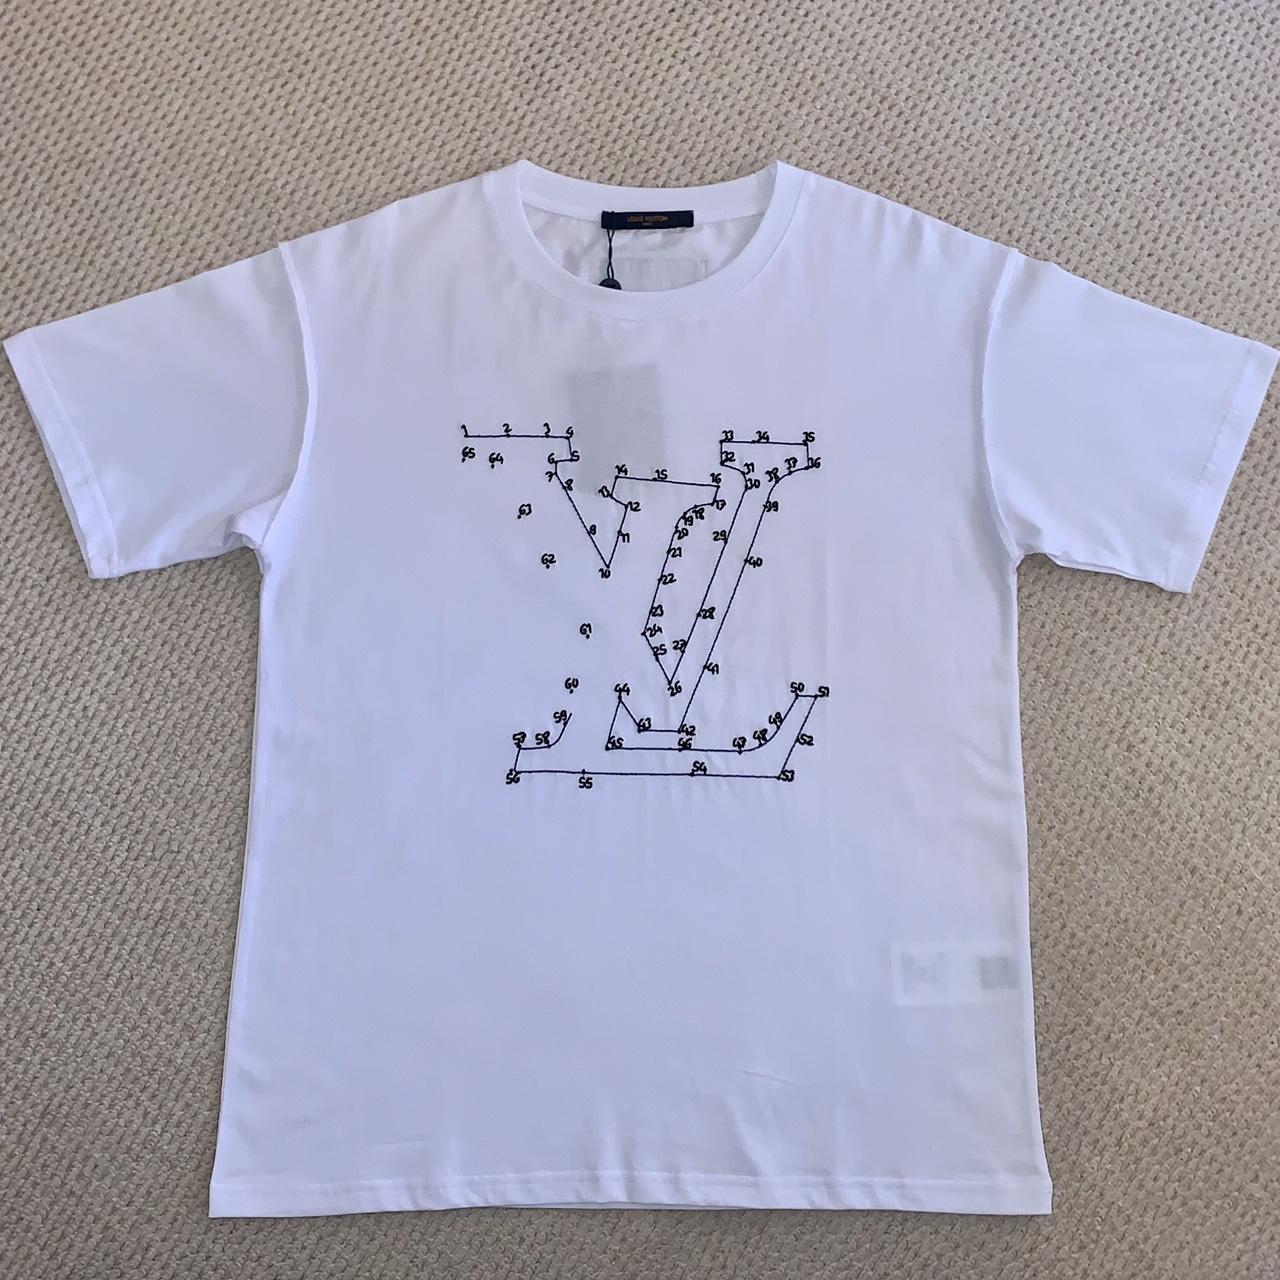 LOUIS VUITTON STITCH PRINT AND EMBROIDERED T-SHIRT